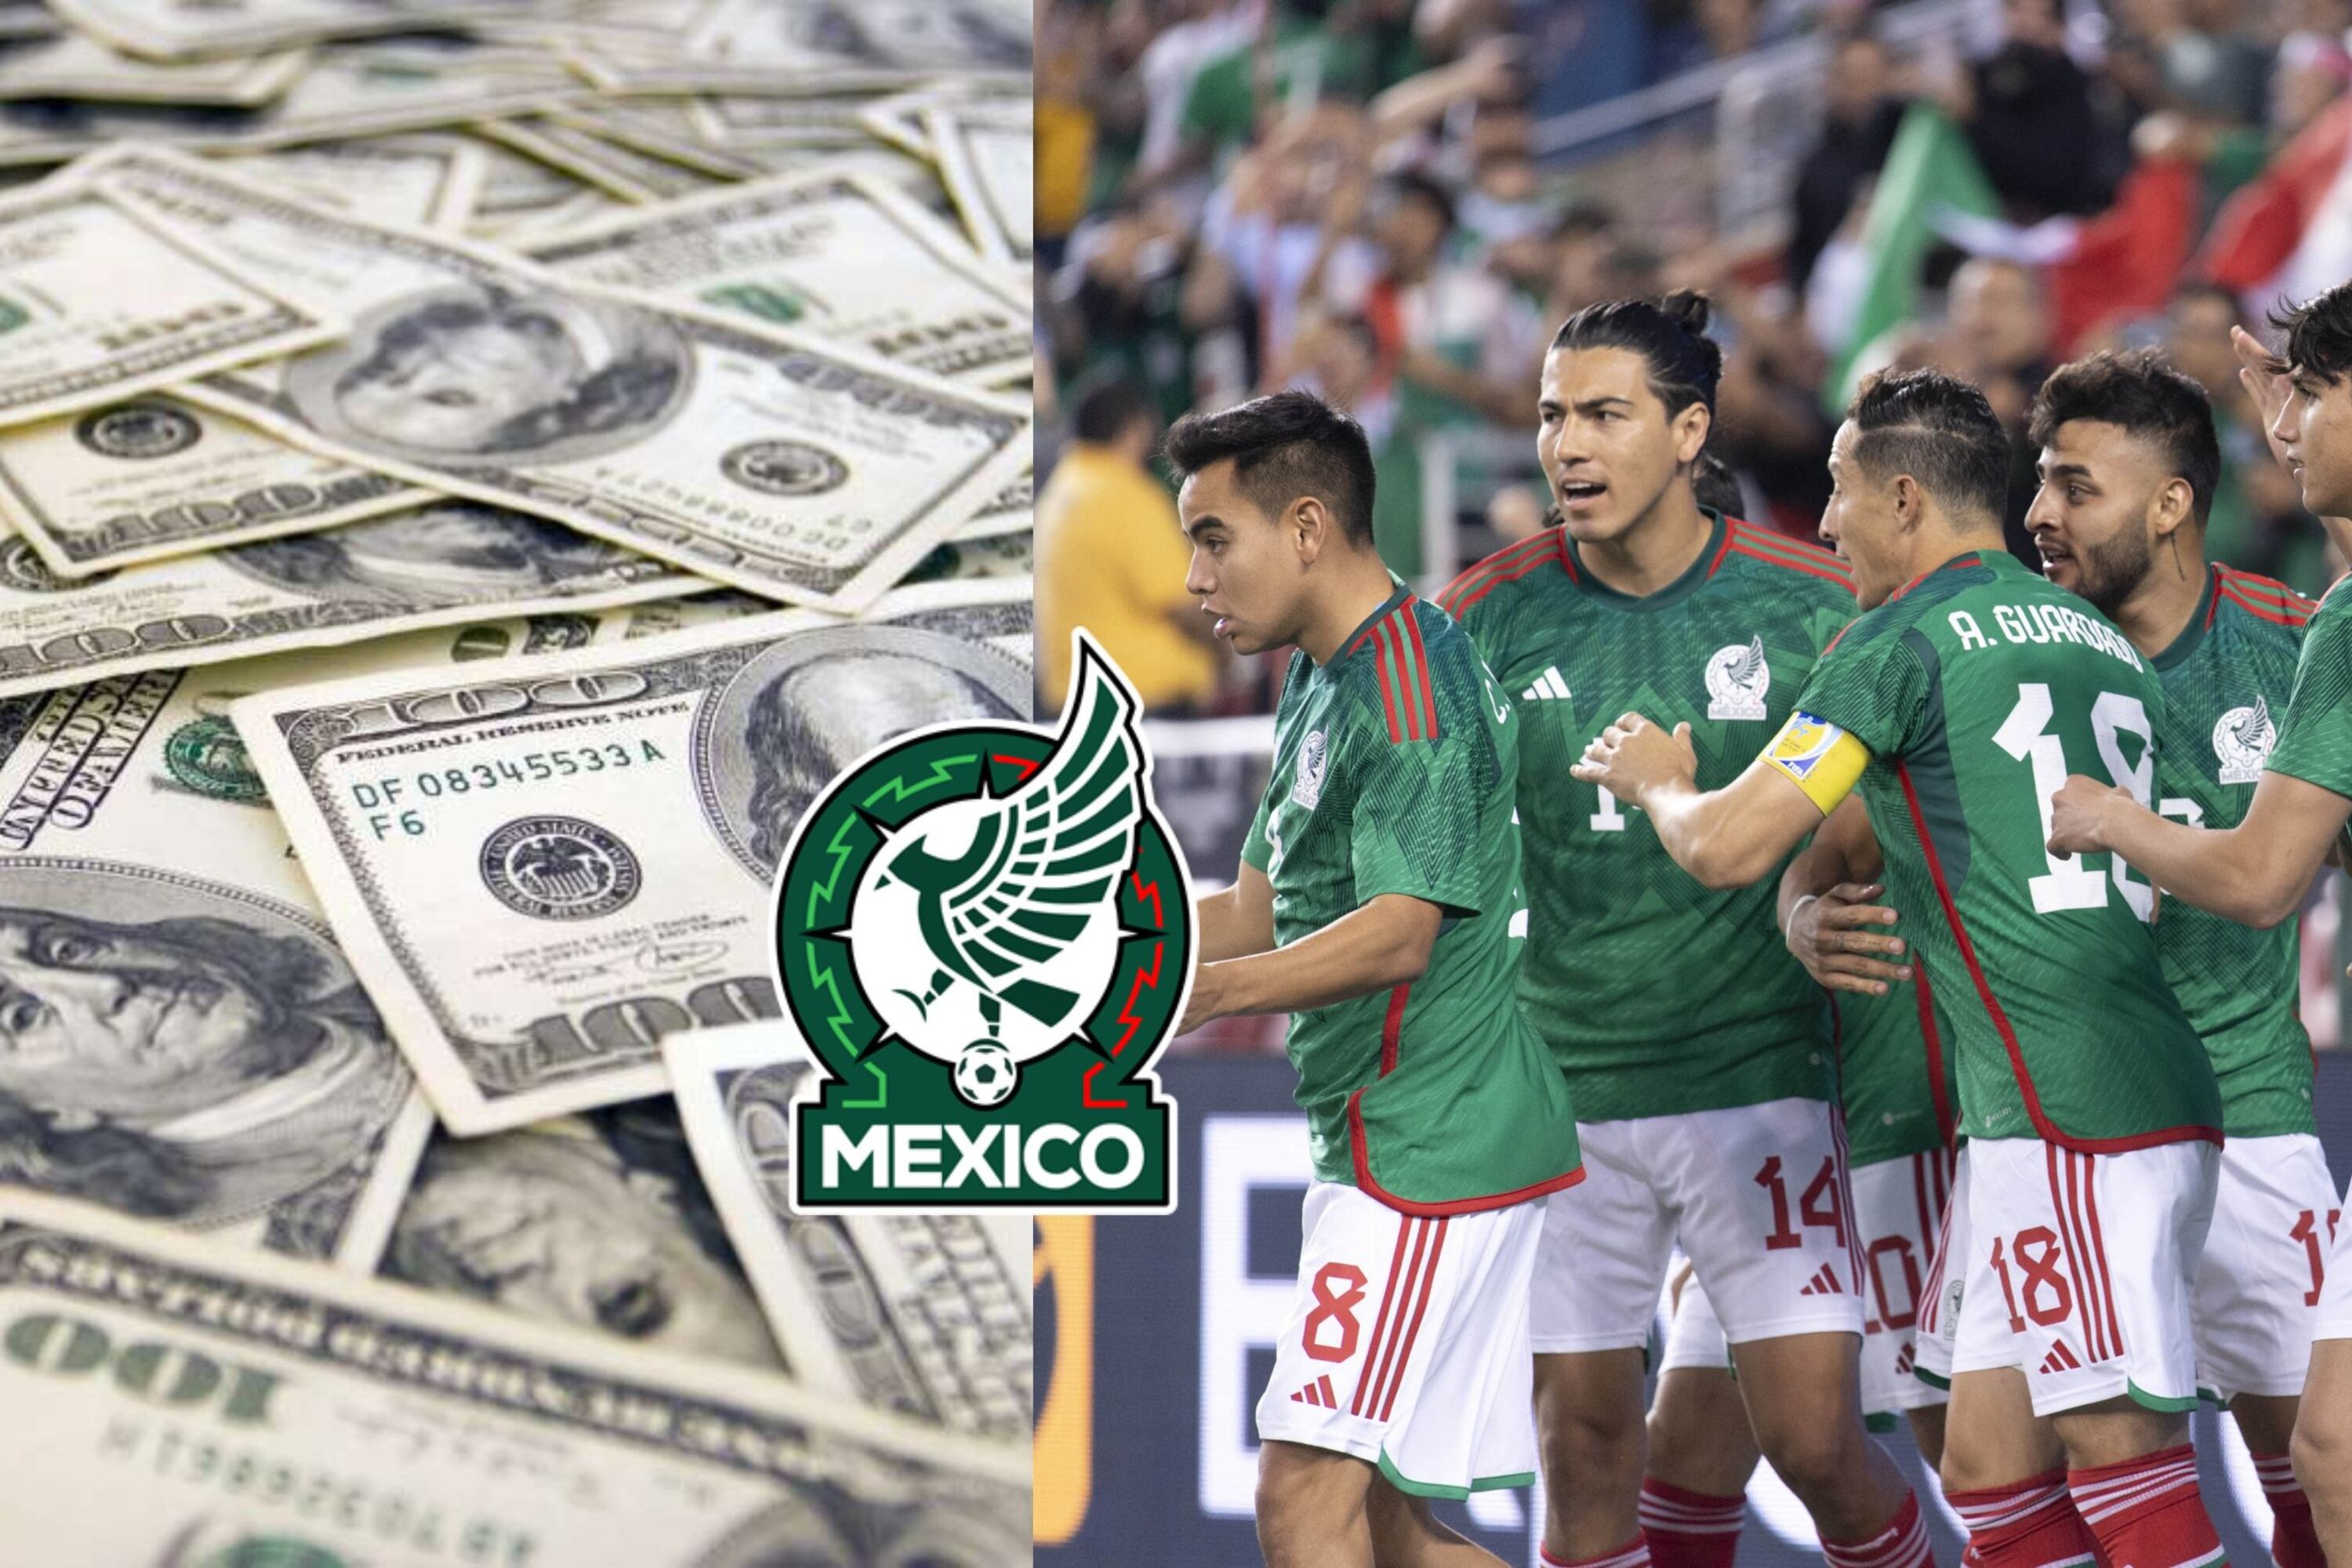 Mexico's player who earns one million without making much effort